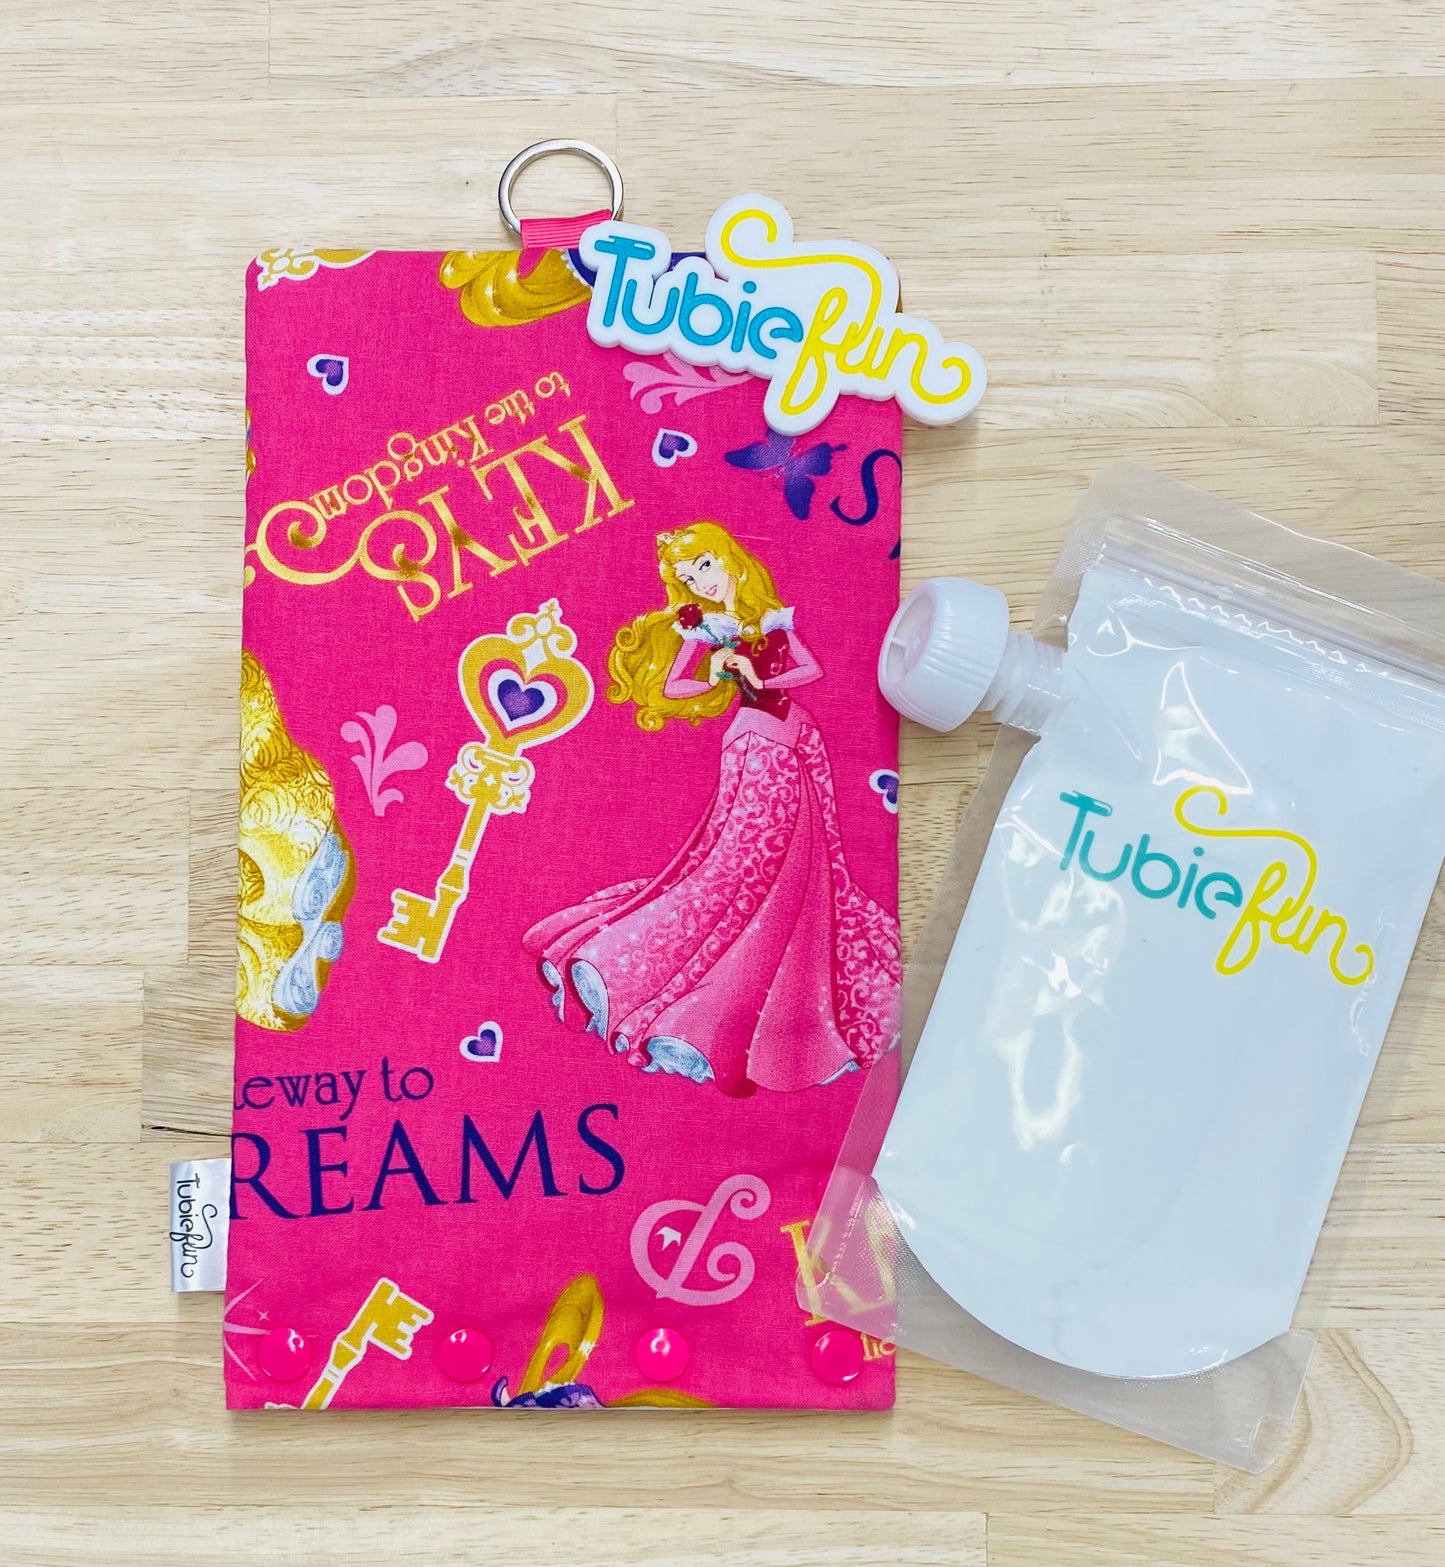 NEW Insulated Milk Bag Suitable for Tubie Fun 500ml Reusable Pouches - Princesses on Dark Pink